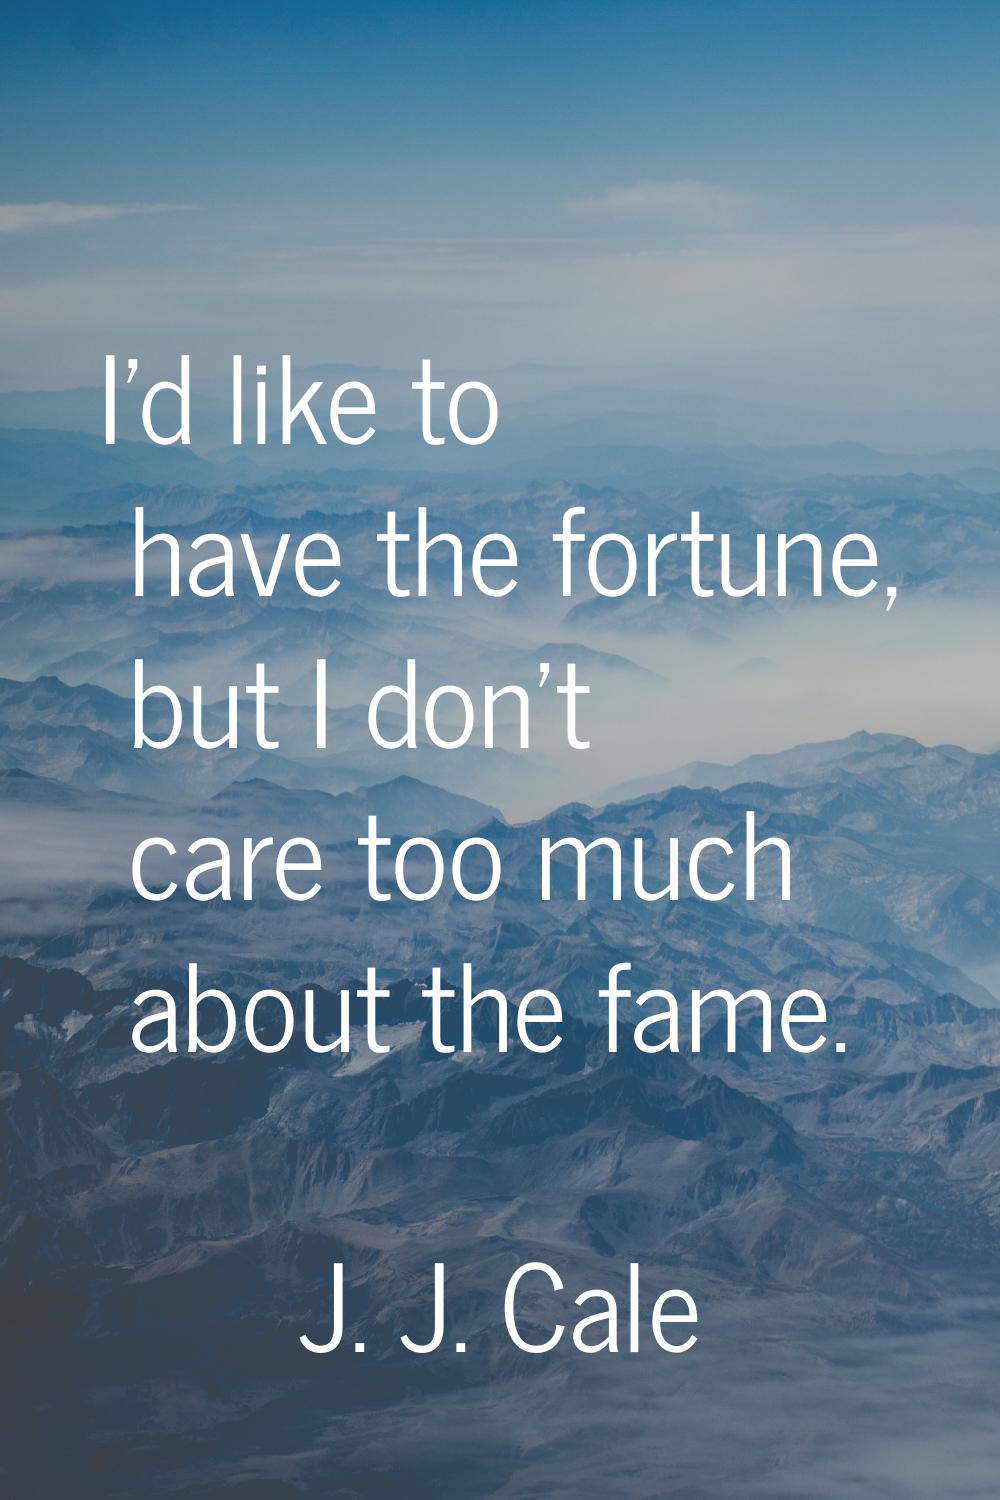 I'd like to have the fortune, but I don't care too much about the fame.